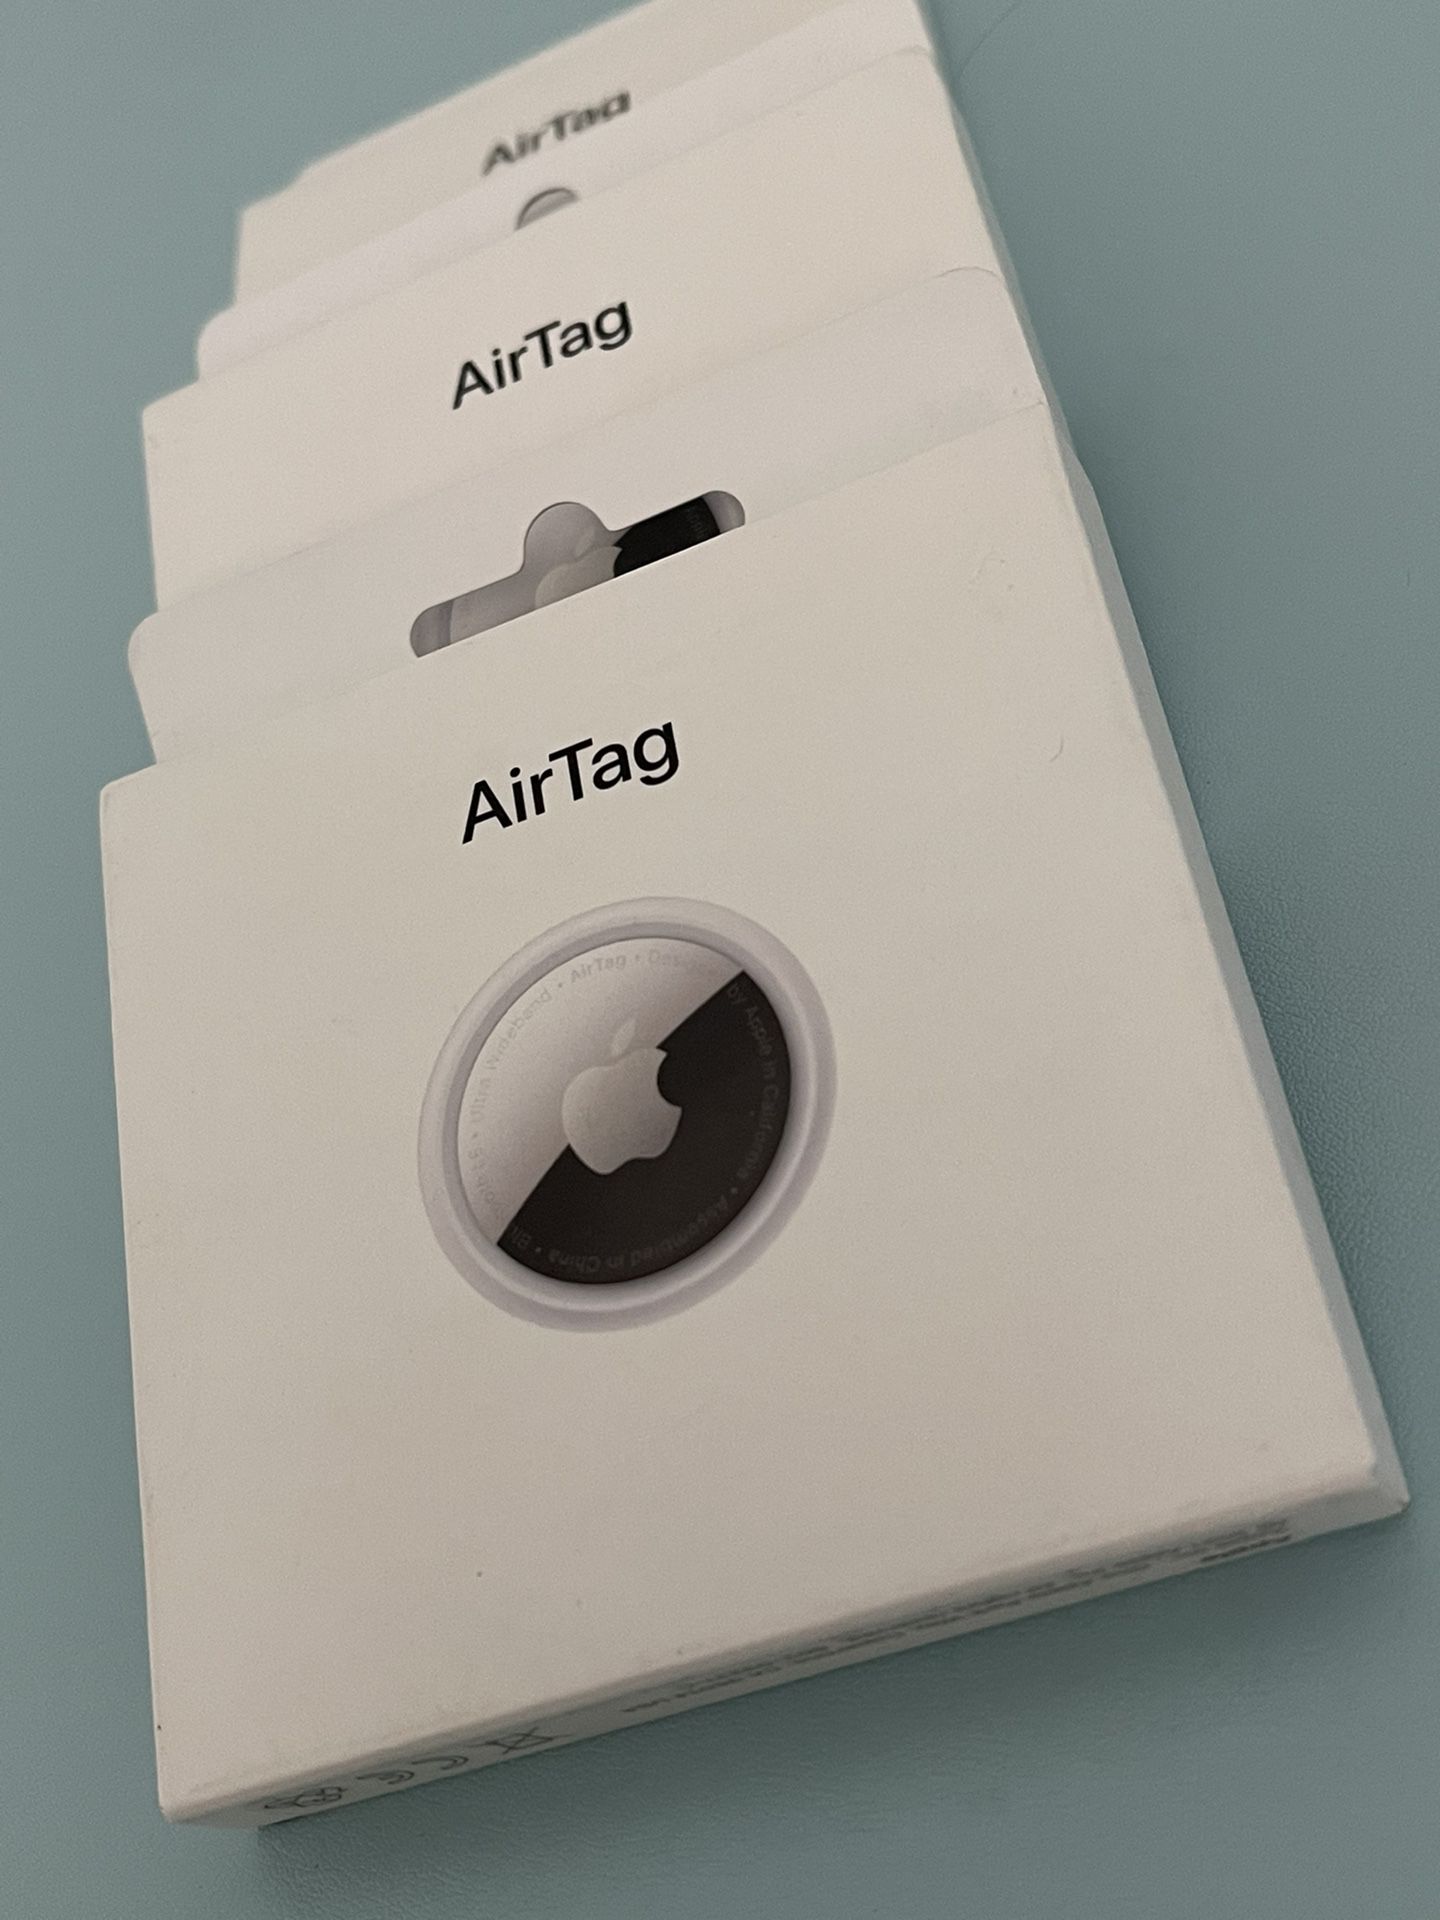 3 Apple Airtag Factory Sealed Brand New! $81 Firm ! No Offer Please Thank You. 